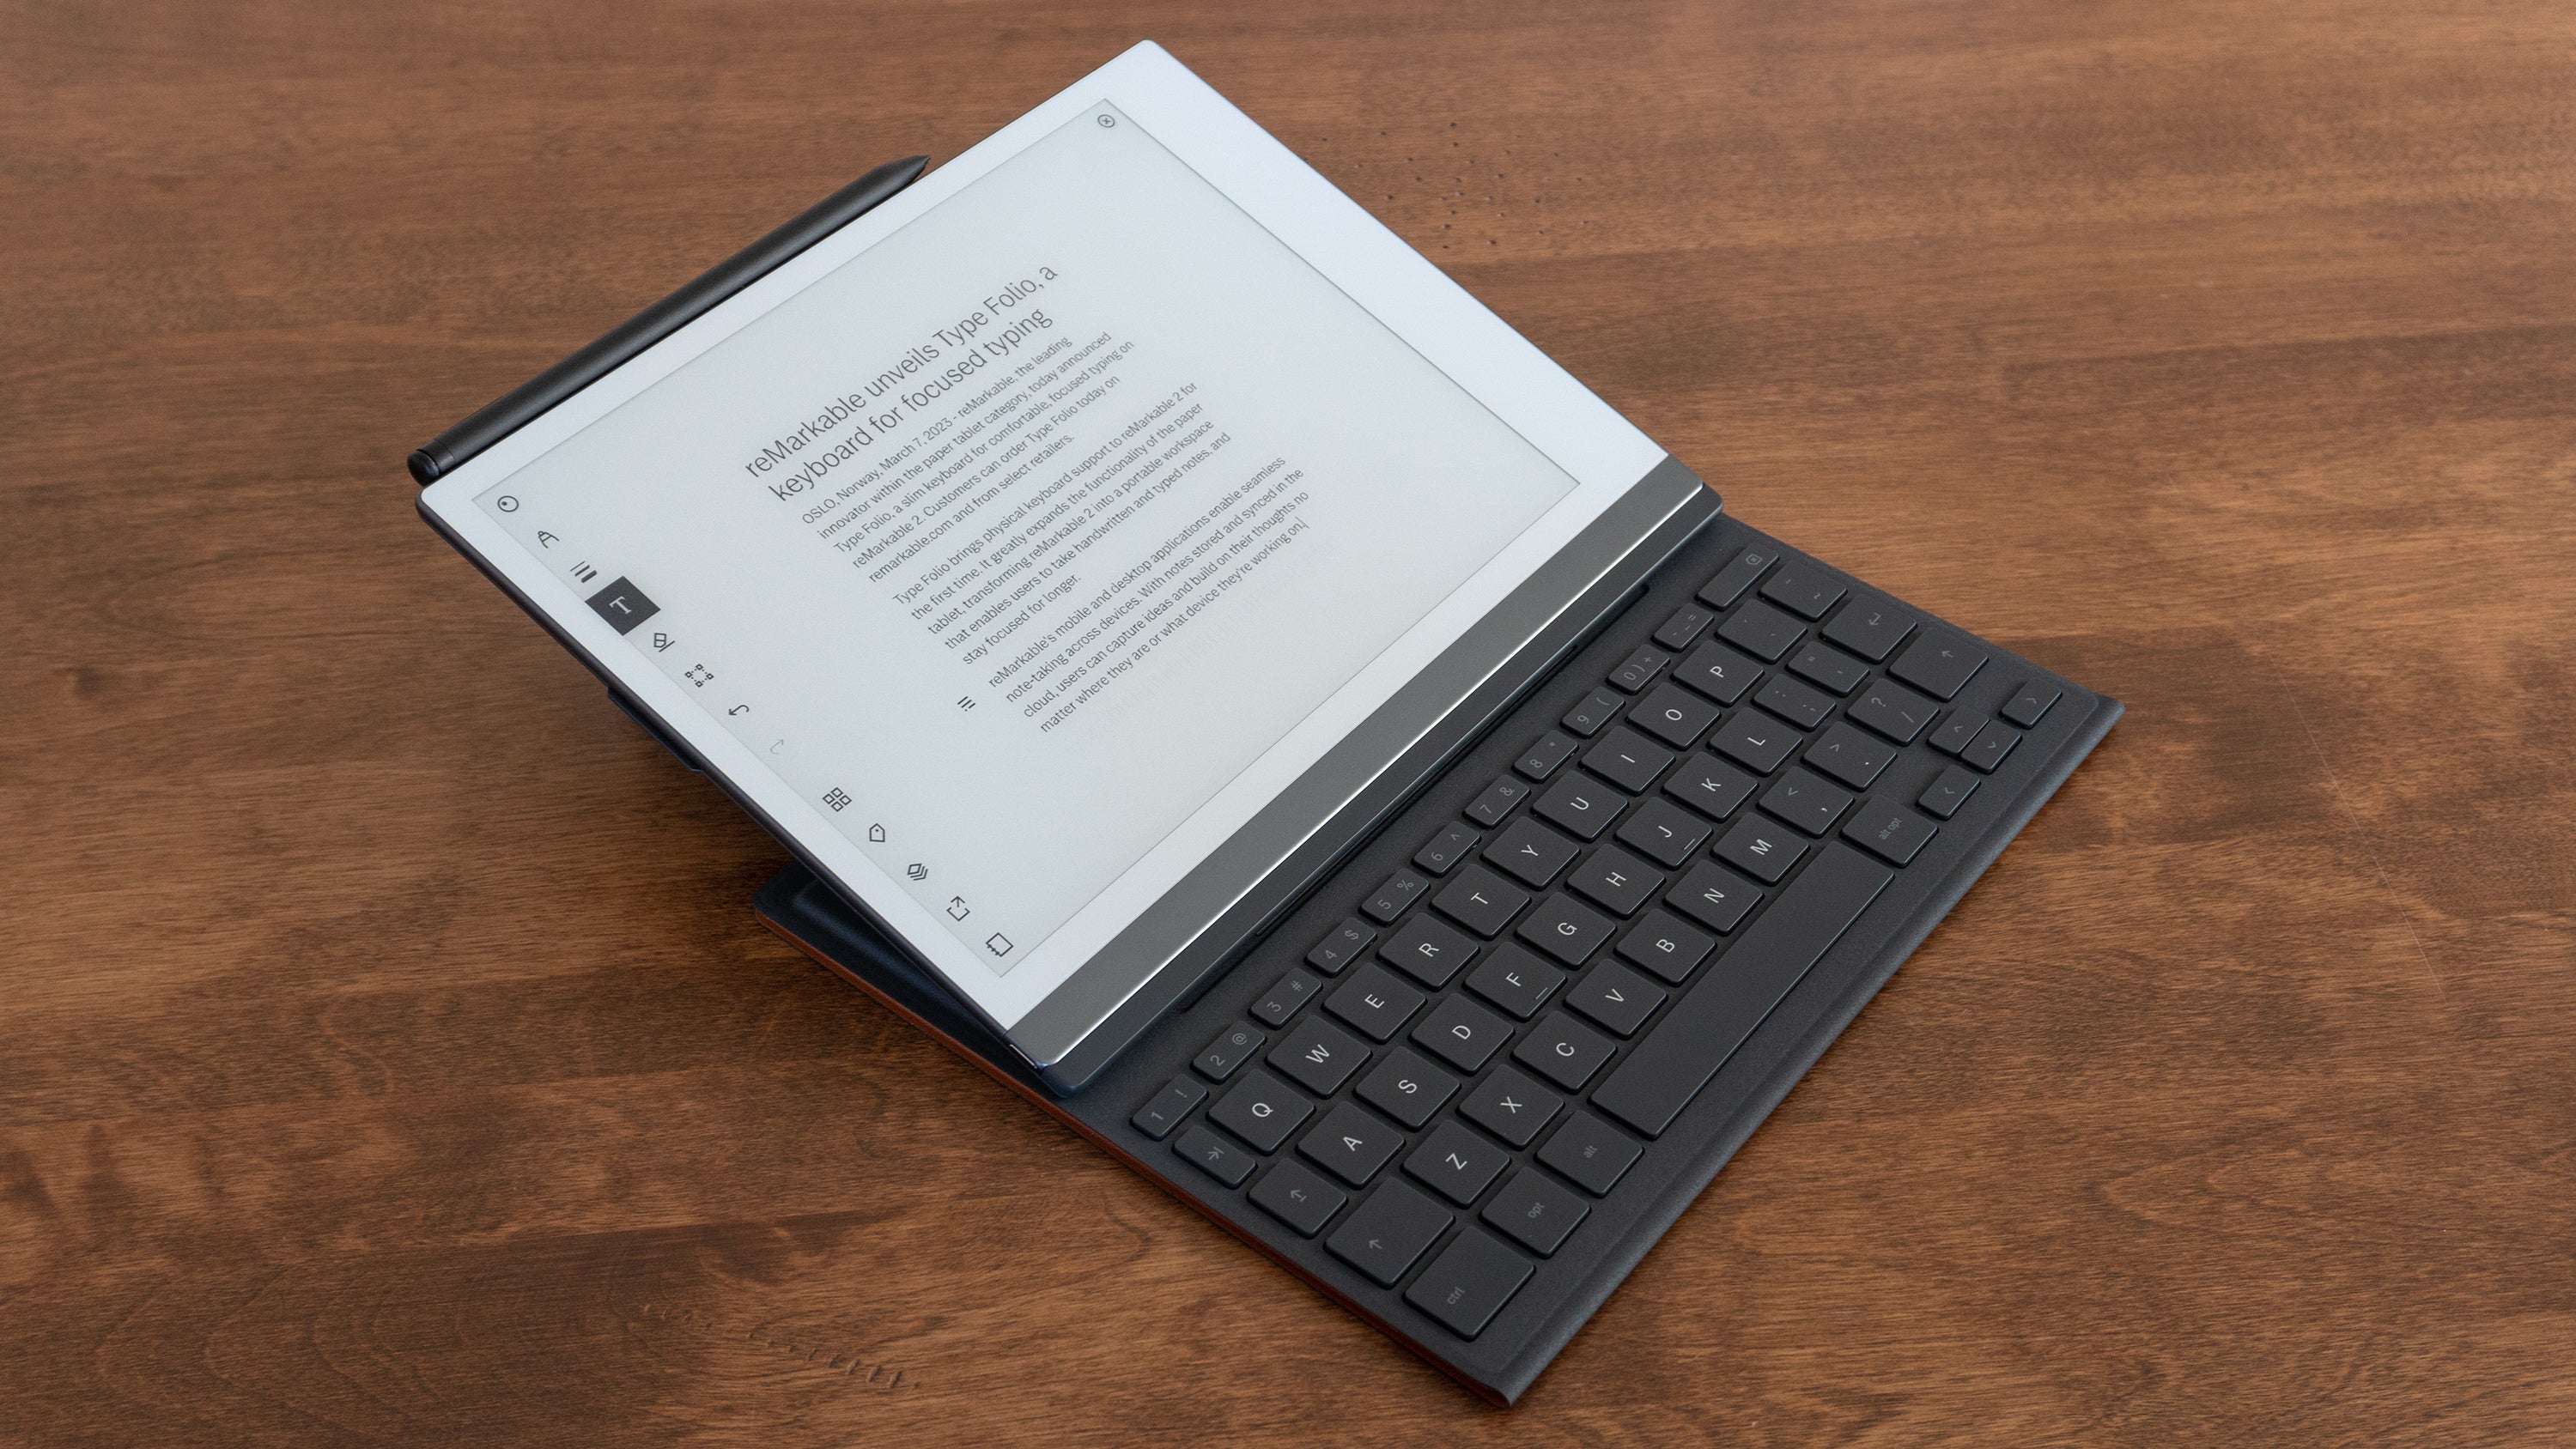 The reMarkable 2 can be set at a very low angle when connected to the Type Folio case, allowing for easier typing and stylus use at the same time. (Photo: Andrew Liszewski | Gizmodo)